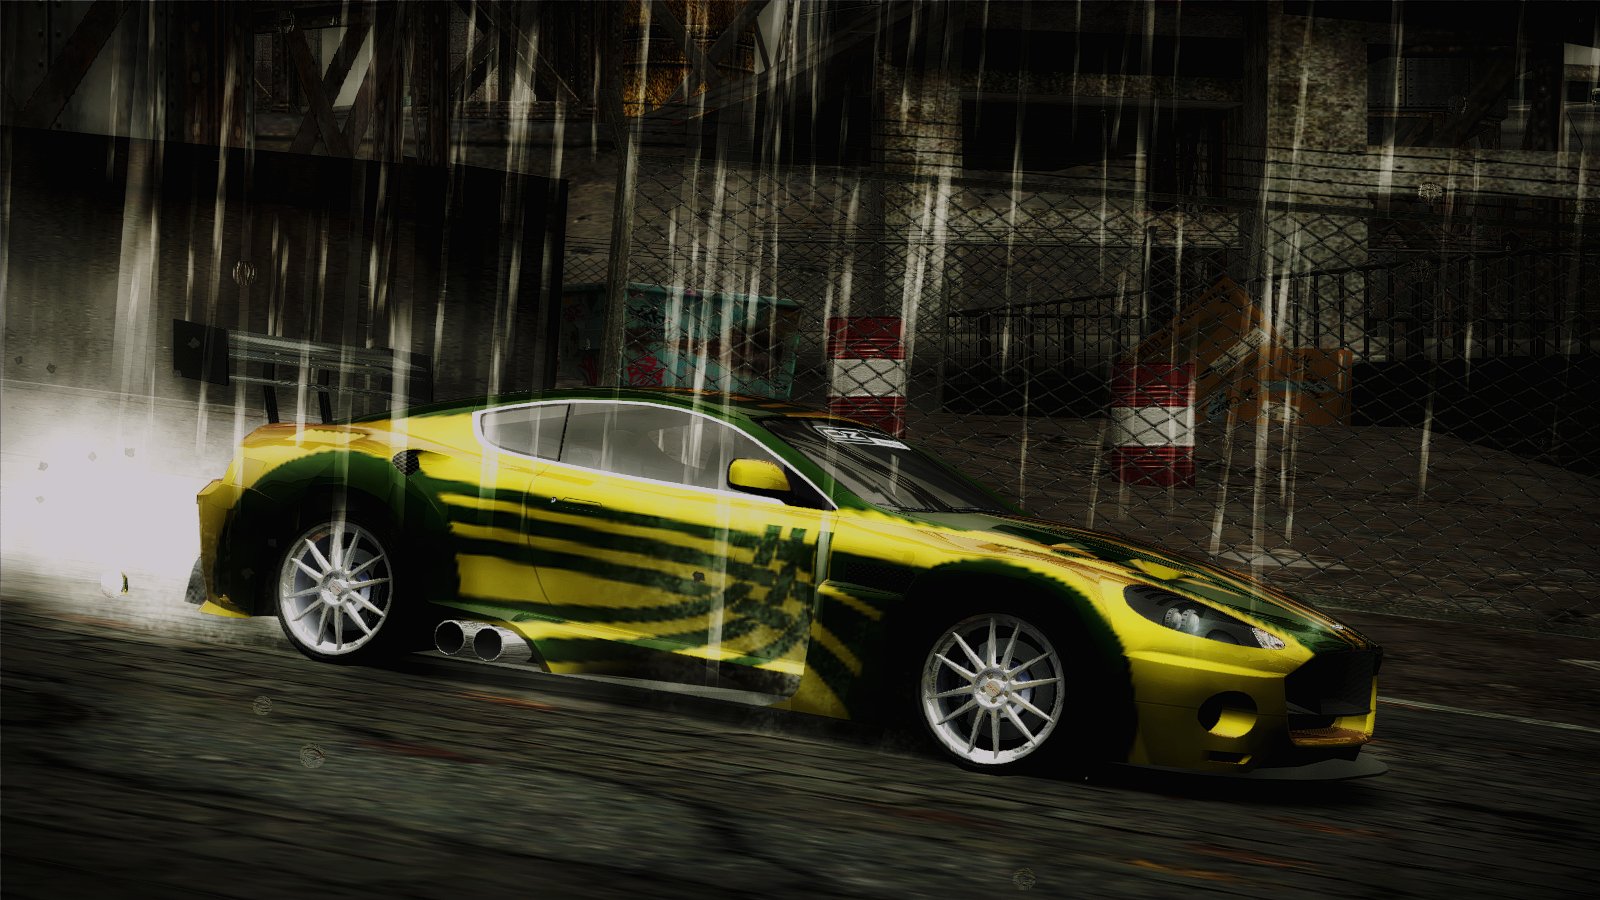 Custom Blacklist Cars´s DB9 Photo by Usagi. Need For Speed Most Wanted